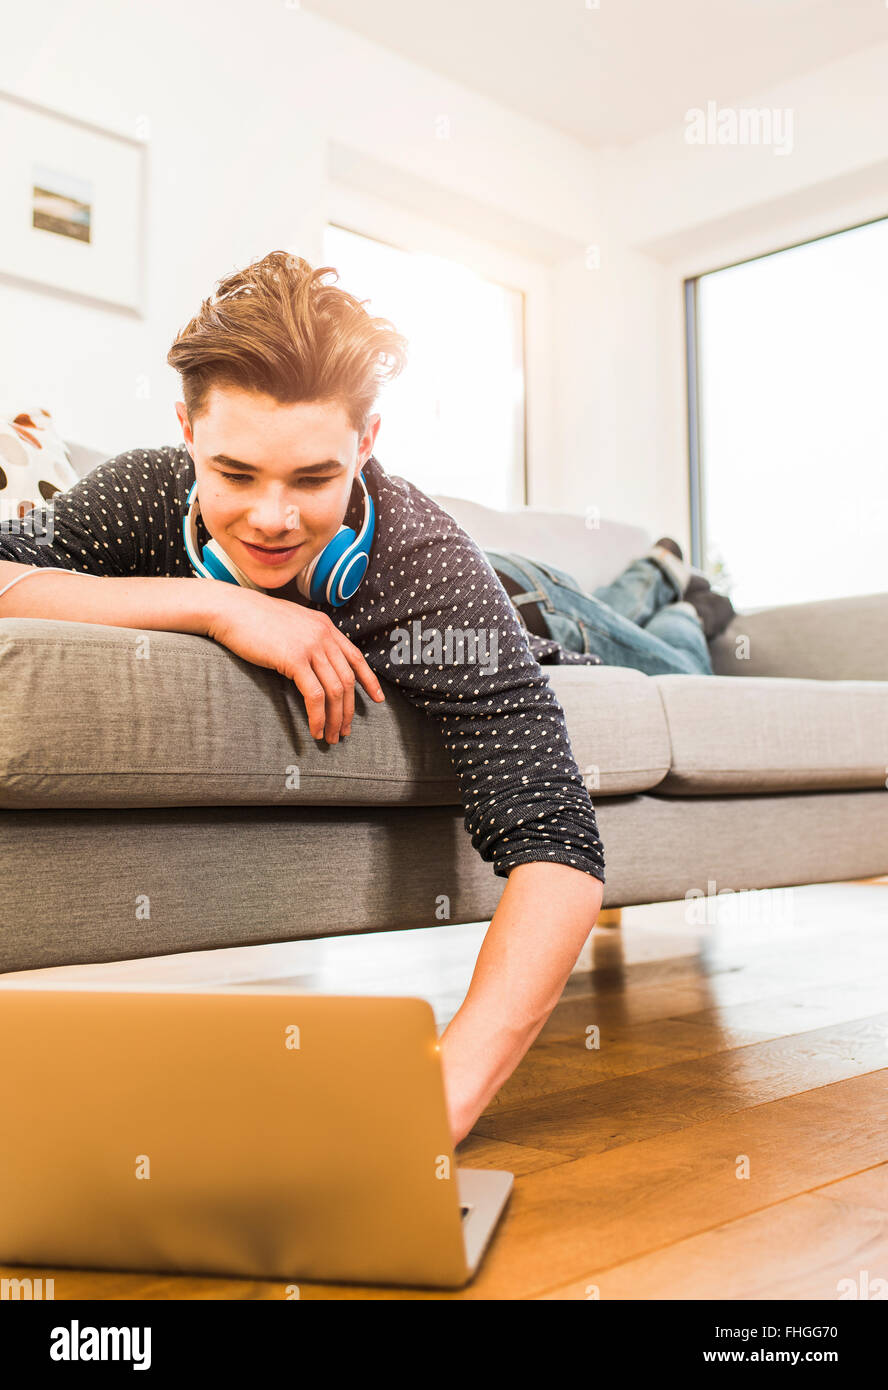 Young man lying on couch using laptop Banque D'Images